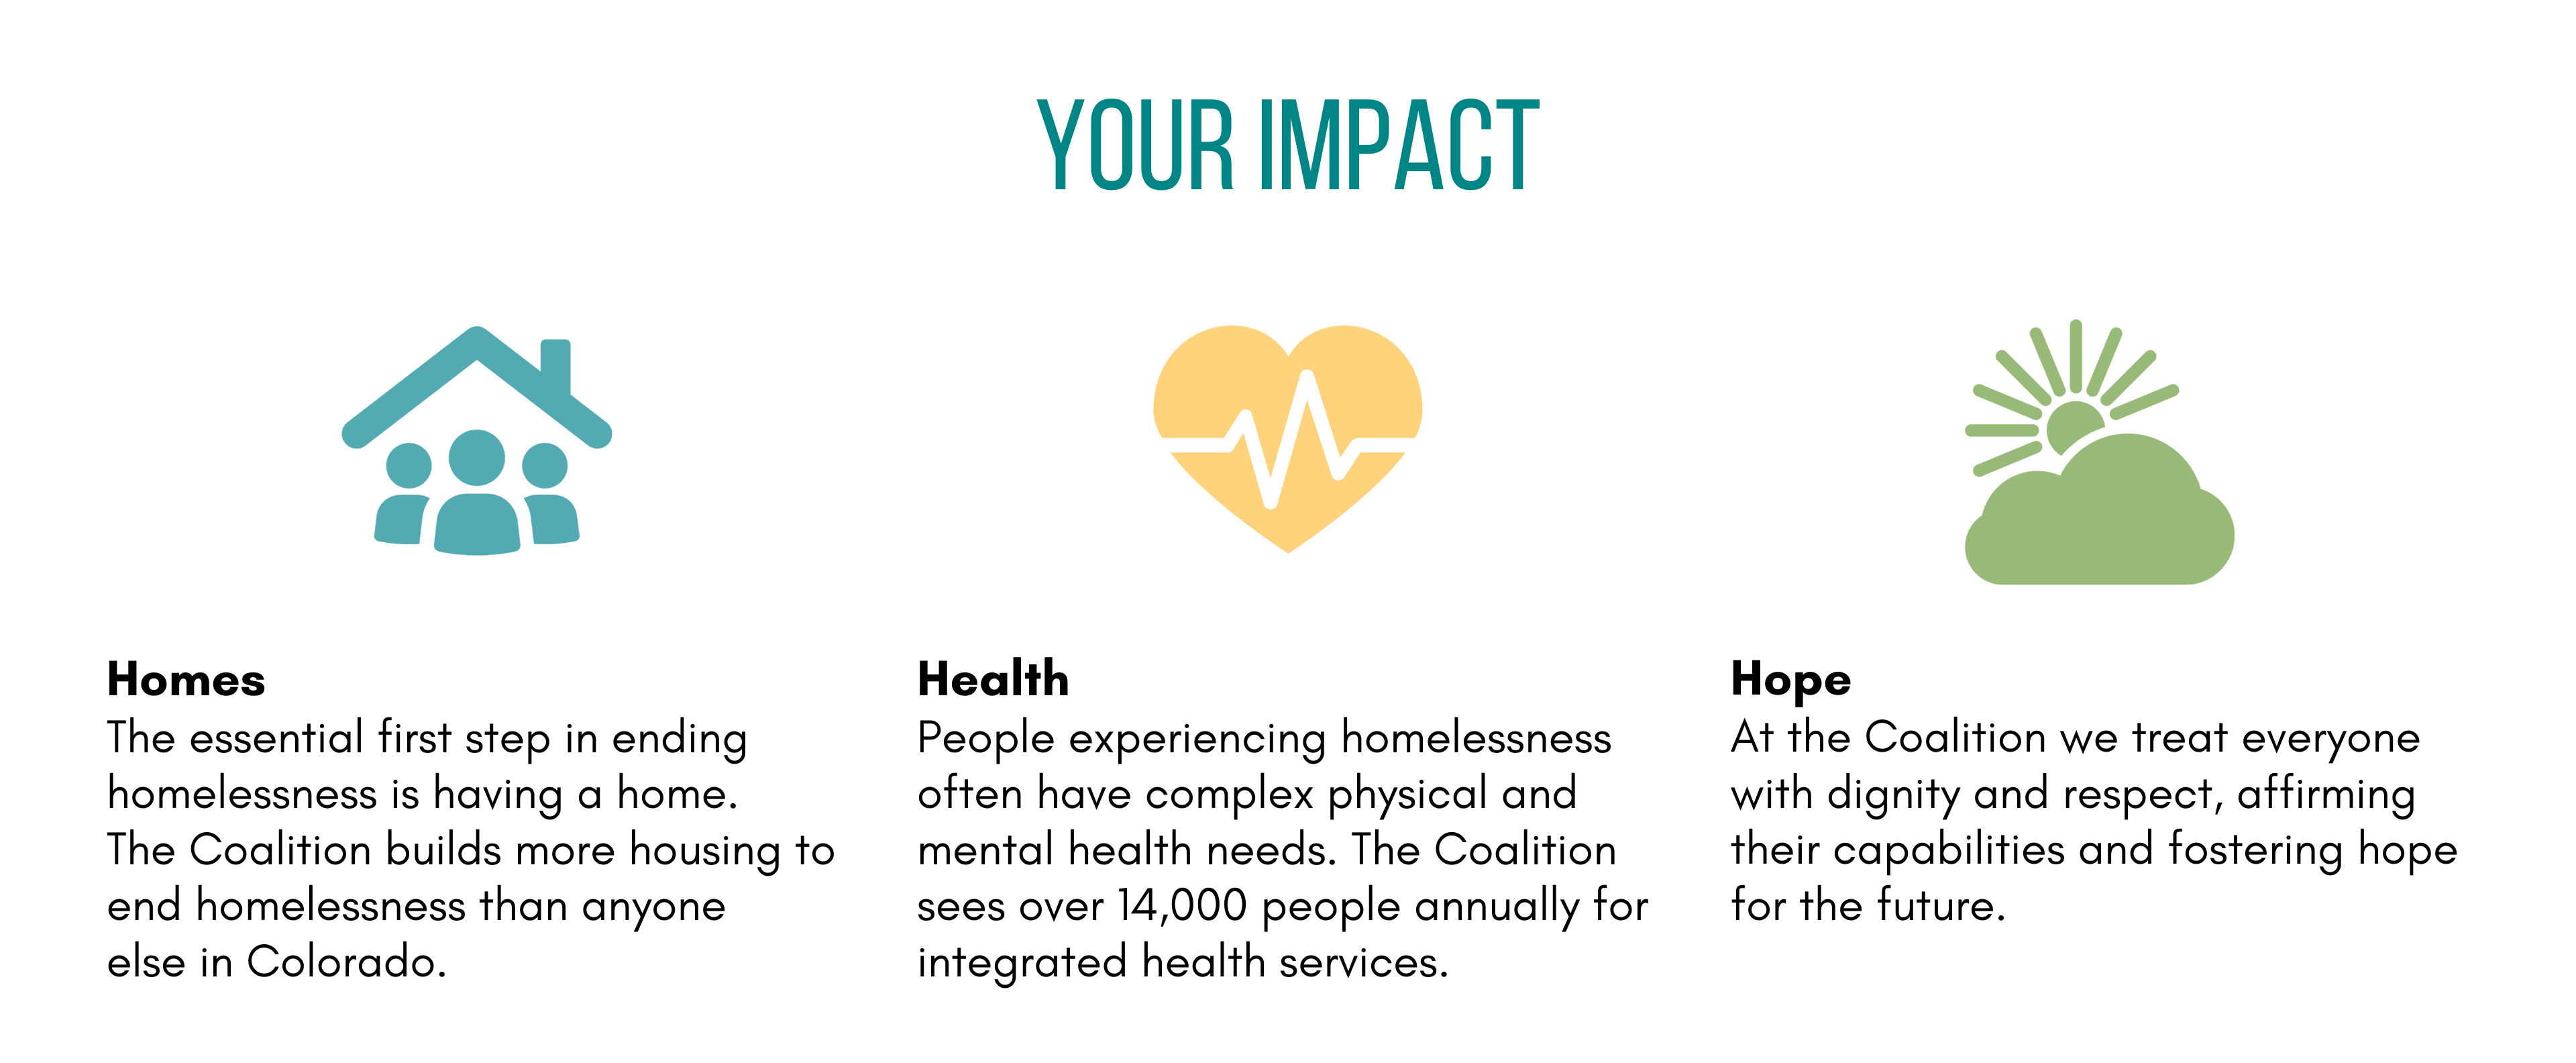 Homes, Health, and Hope Icon